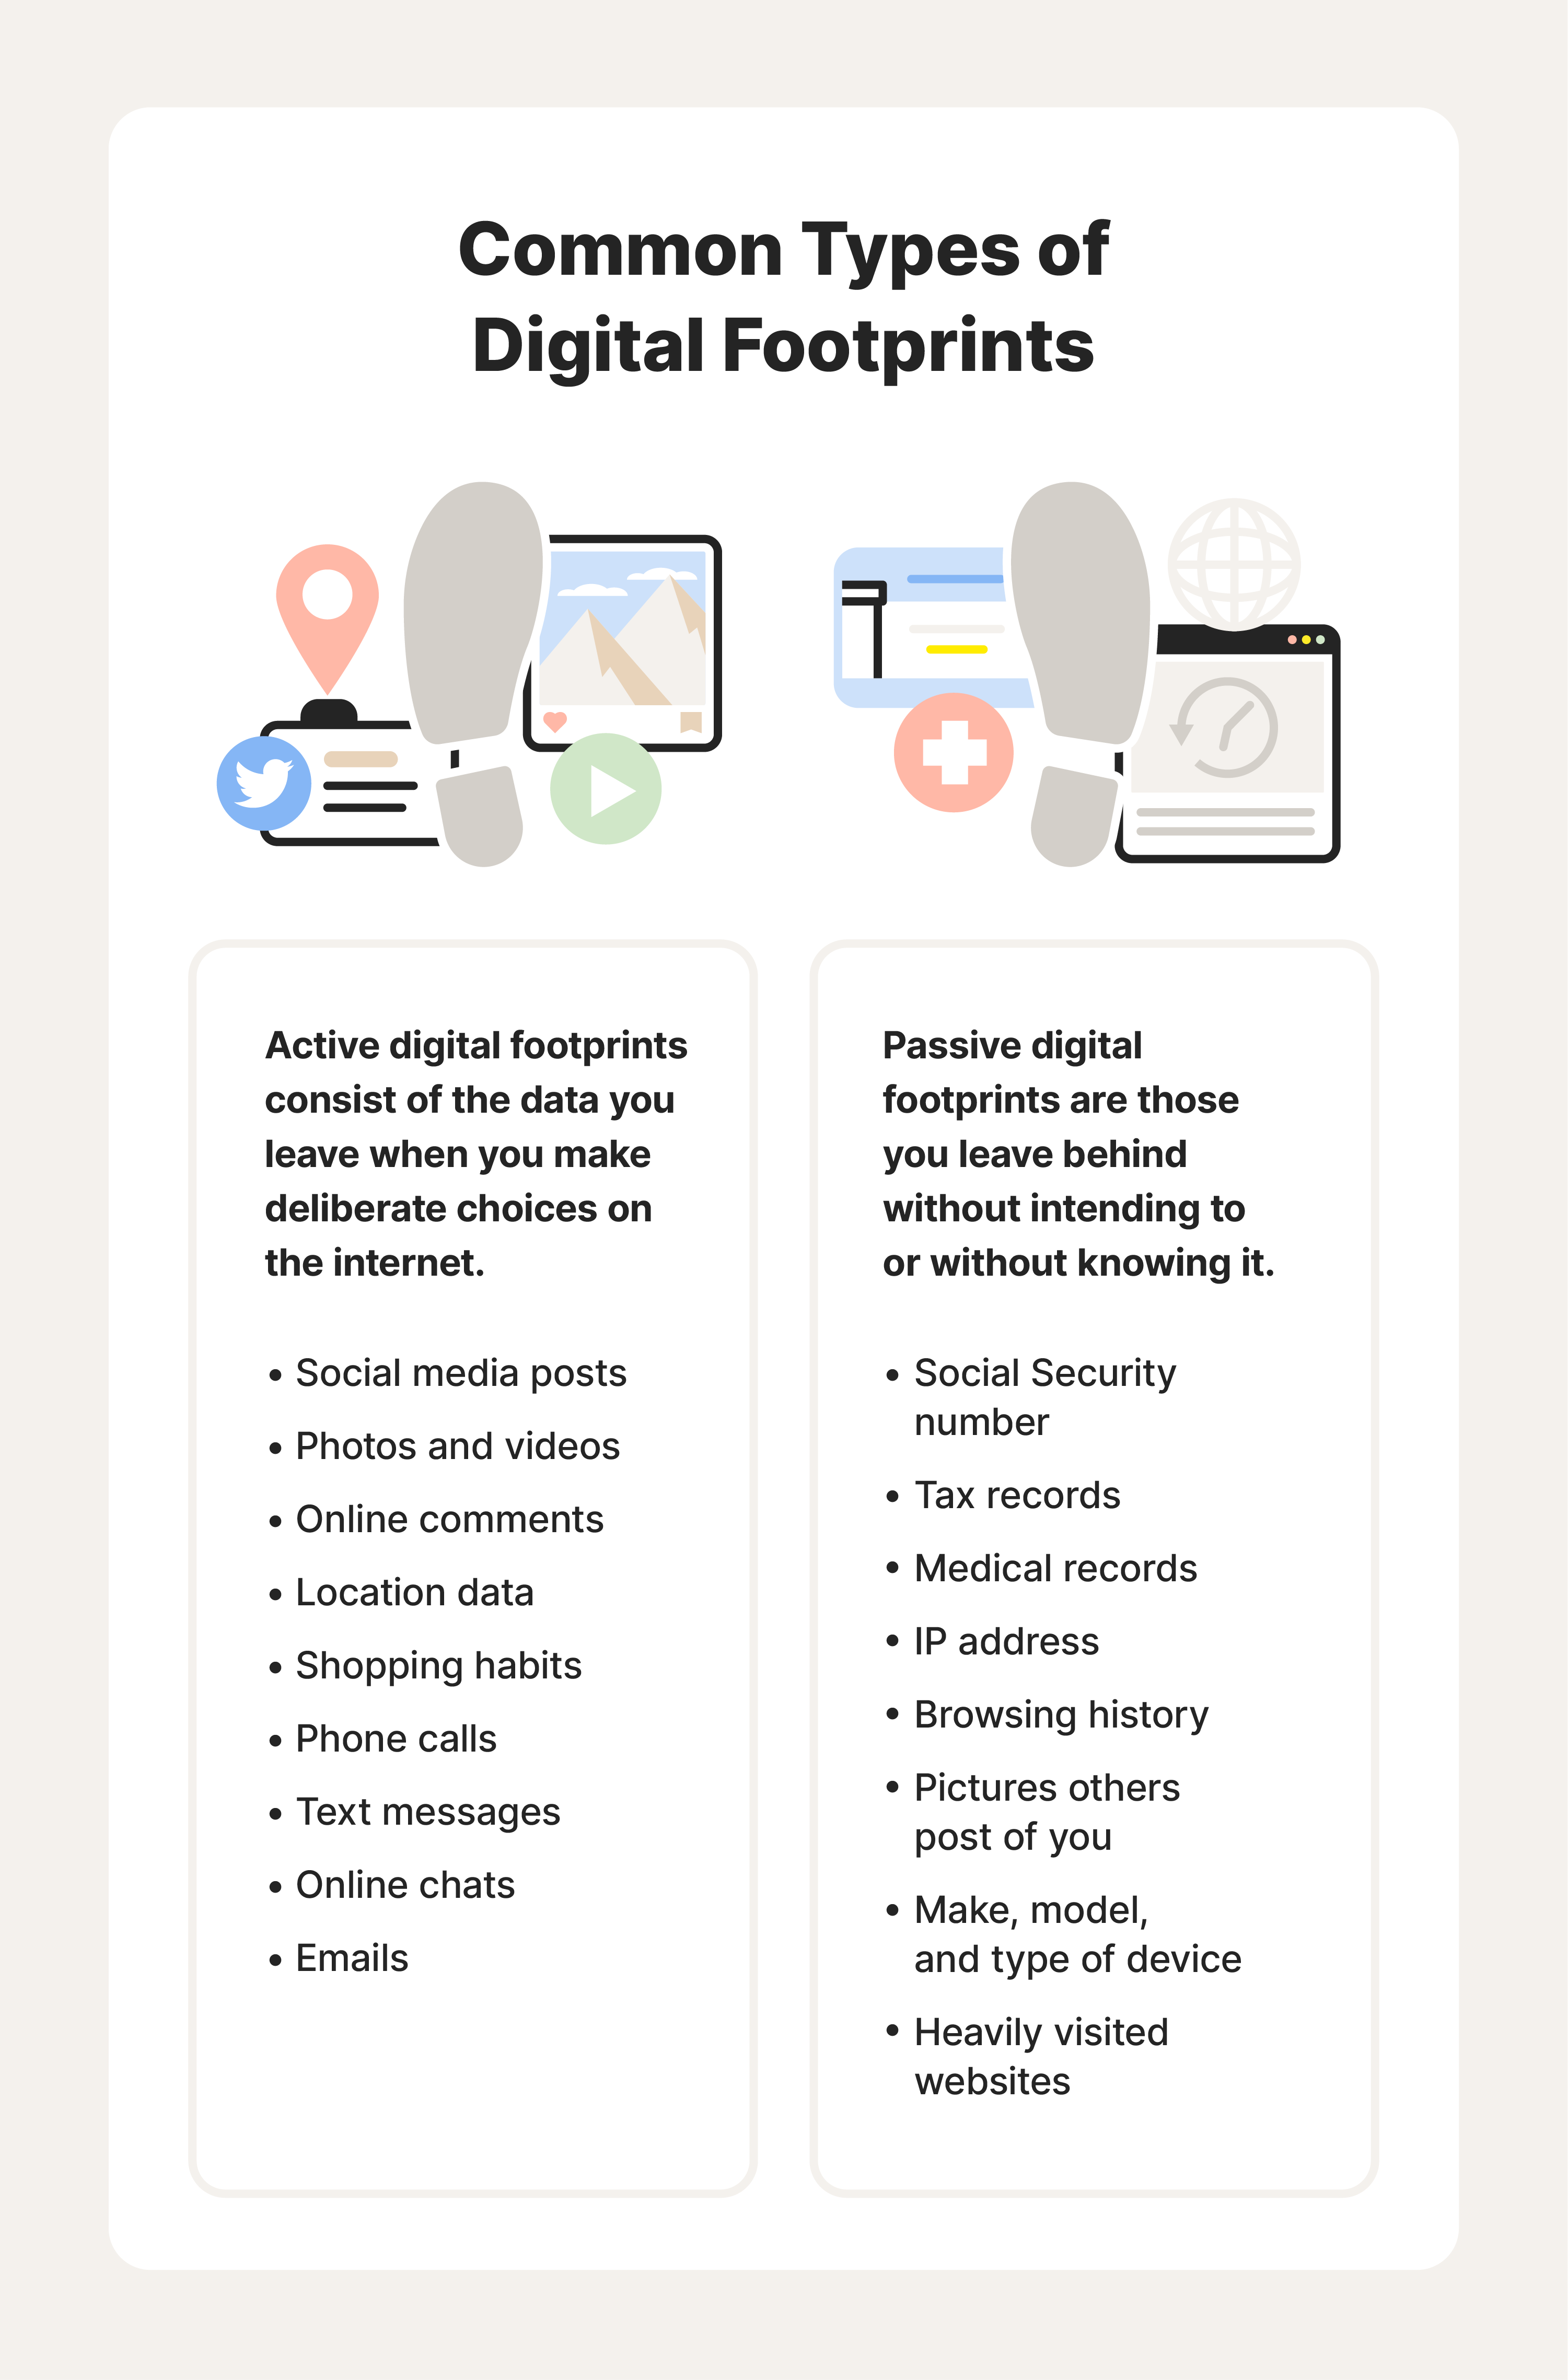 Graphic showing the common types of digital footprints.